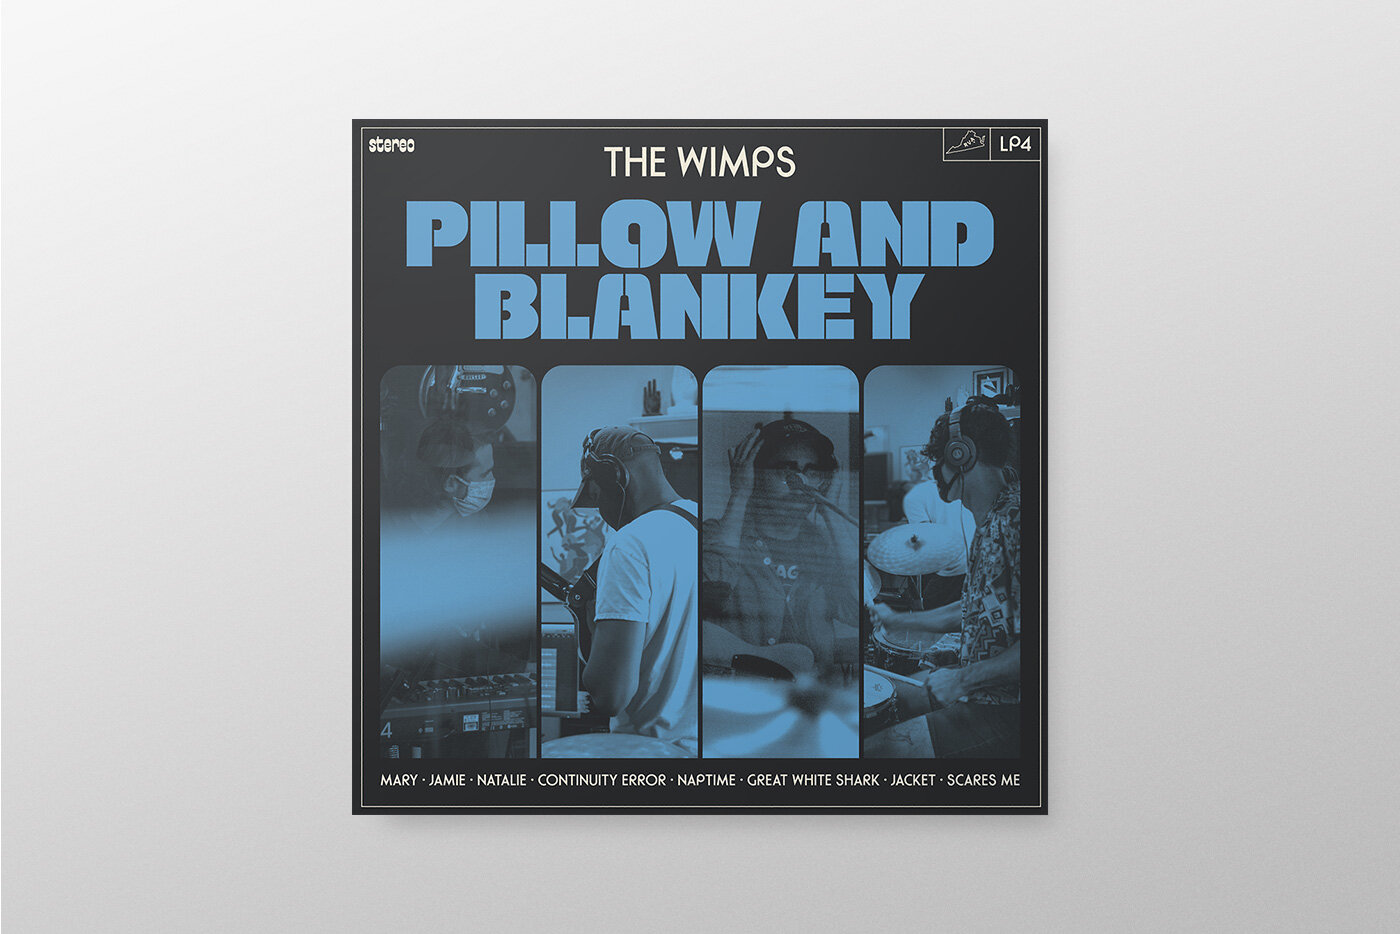 The Wimps Pillow and Blankey Album Art